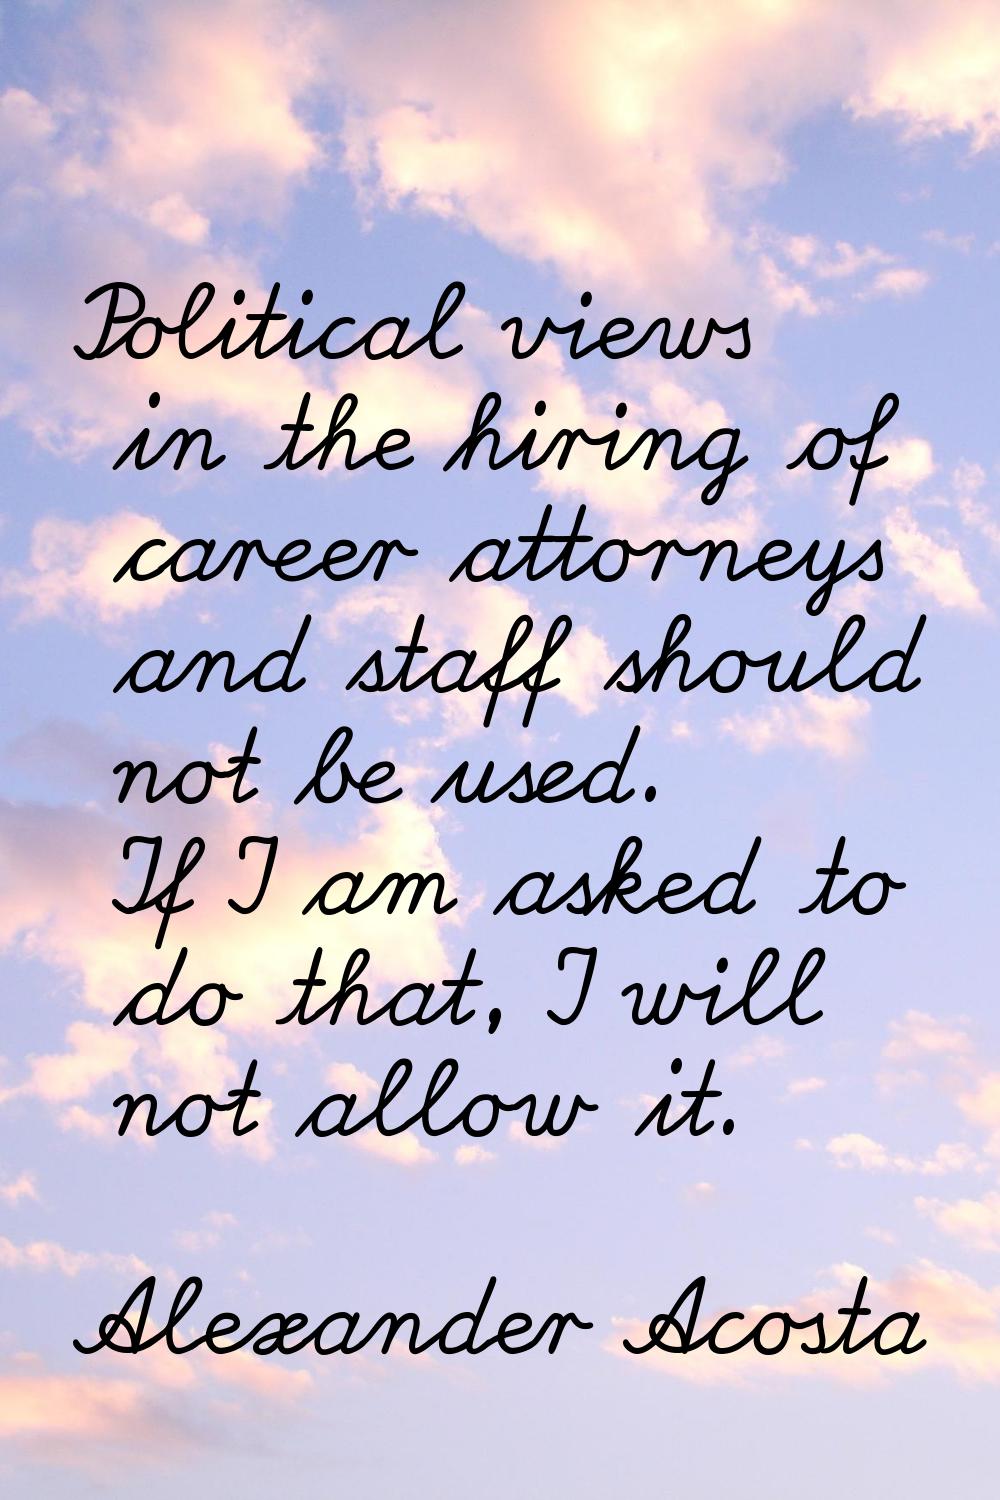 Political views in the hiring of career attorneys and staff should not be used. If I am asked to do